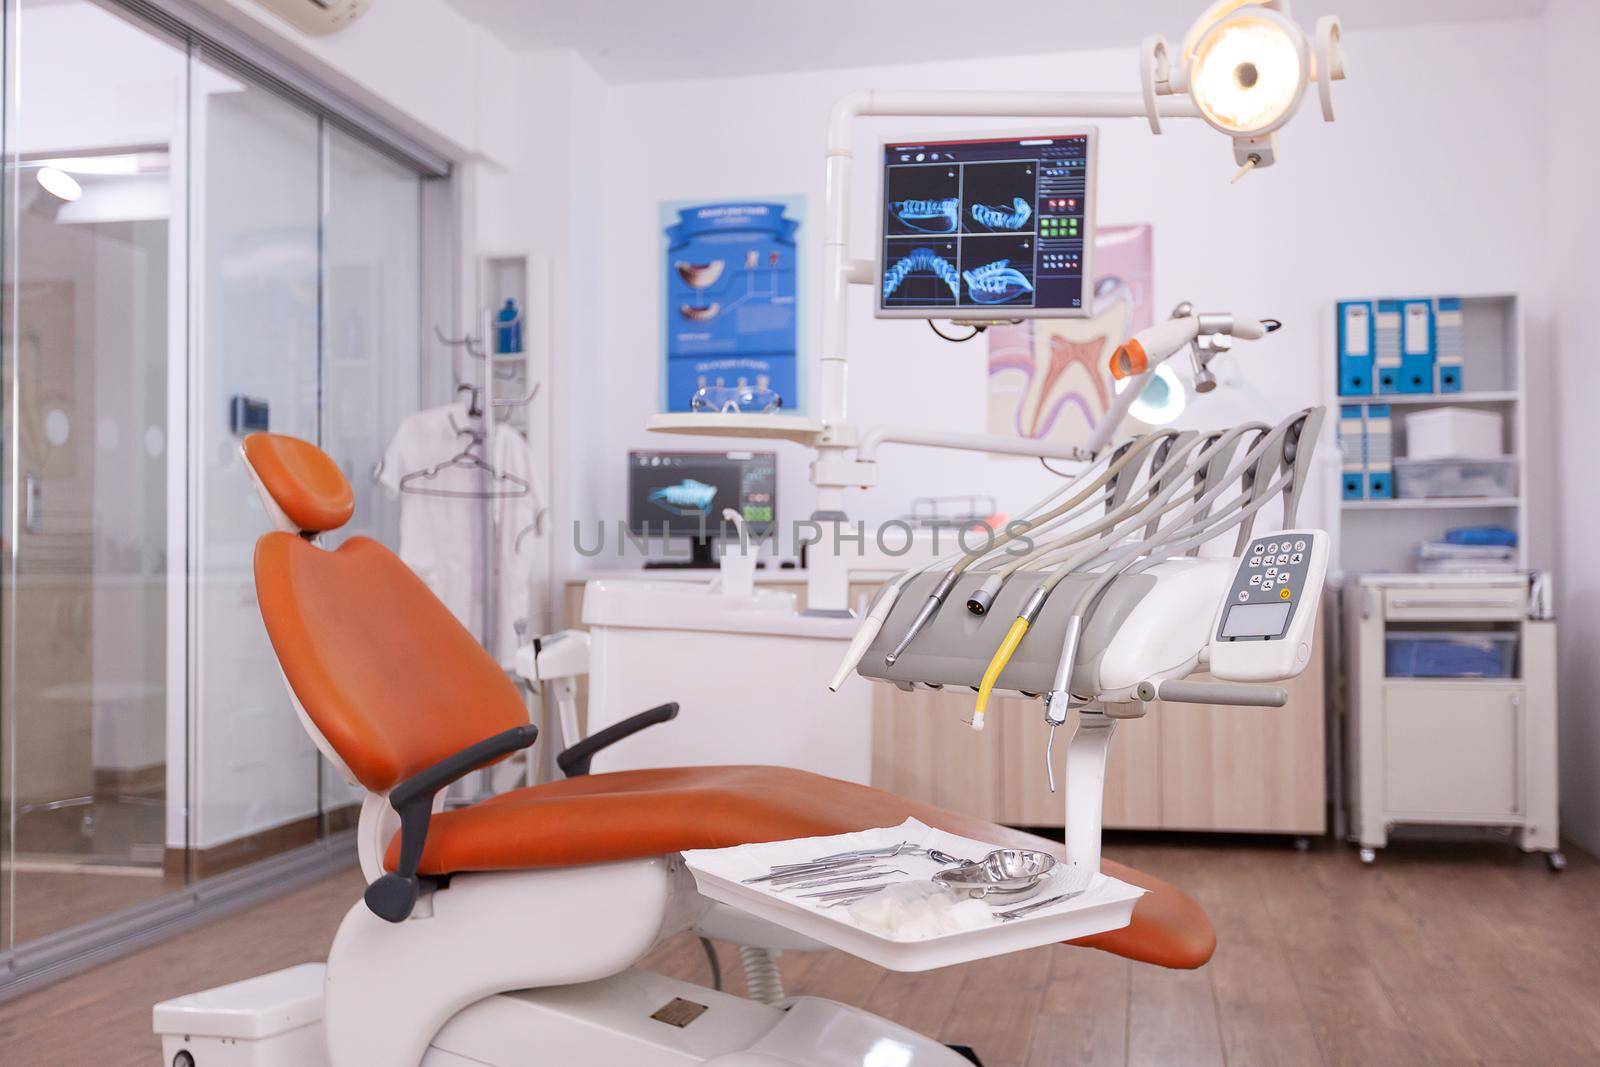 Interior of empty oral stomatology orthodontist office with dental teeth radiography on monitor. Professional dentistry hospital room with nobody in it prepared for tooth diagnosis treatment